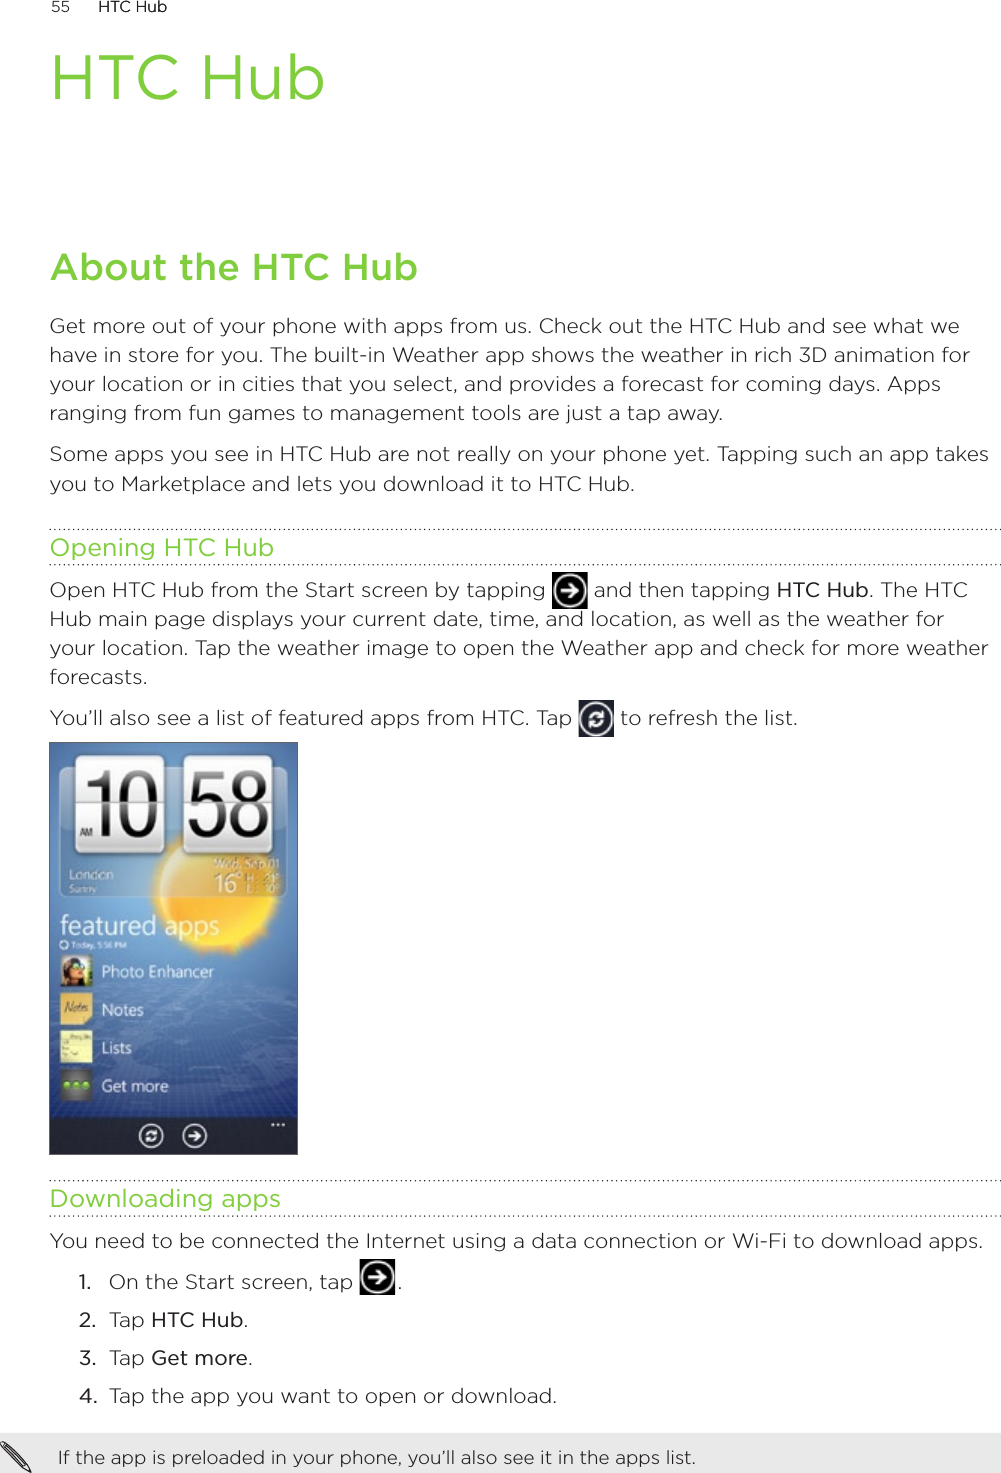 55      HTC HubHTC Hub      HTC HubAbout the HTC HubGet more out of your phone with apps from us. Check out the HTC Hub and see what we have in store for you. The built-in Weather app shows the weather in rich 3D animation for your location or in cities that you select, and provides a forecast for coming days. Apps ranging from fun games to management tools are just a tap away. Some apps you see in HTC Hub are not really on your phone yet. Tapping such an app takes you to Marketplace and lets you download it to HTC Hub.  Opening HTC HubOpen HTC Hub from the Start screen by tapping   and then tapping HTC Hub. The HTC Hub main page displays your current date, time, and location, as well as the weather for your location. Tap the weather image to open the Weather app and check for more weather forecasts.You’ll also see a list of featured apps from HTC. Tap   to refresh the list.Downloading appsYou need to be connected the Internet using a data connection or Wi-Fi to download apps.On the Start screen, tap   .Tap HTC Hub. Tap Get more.Tap the app you want to open or download.If the app is preloaded in your phone, you’ll also see it in the apps list. 1.2.3.4.